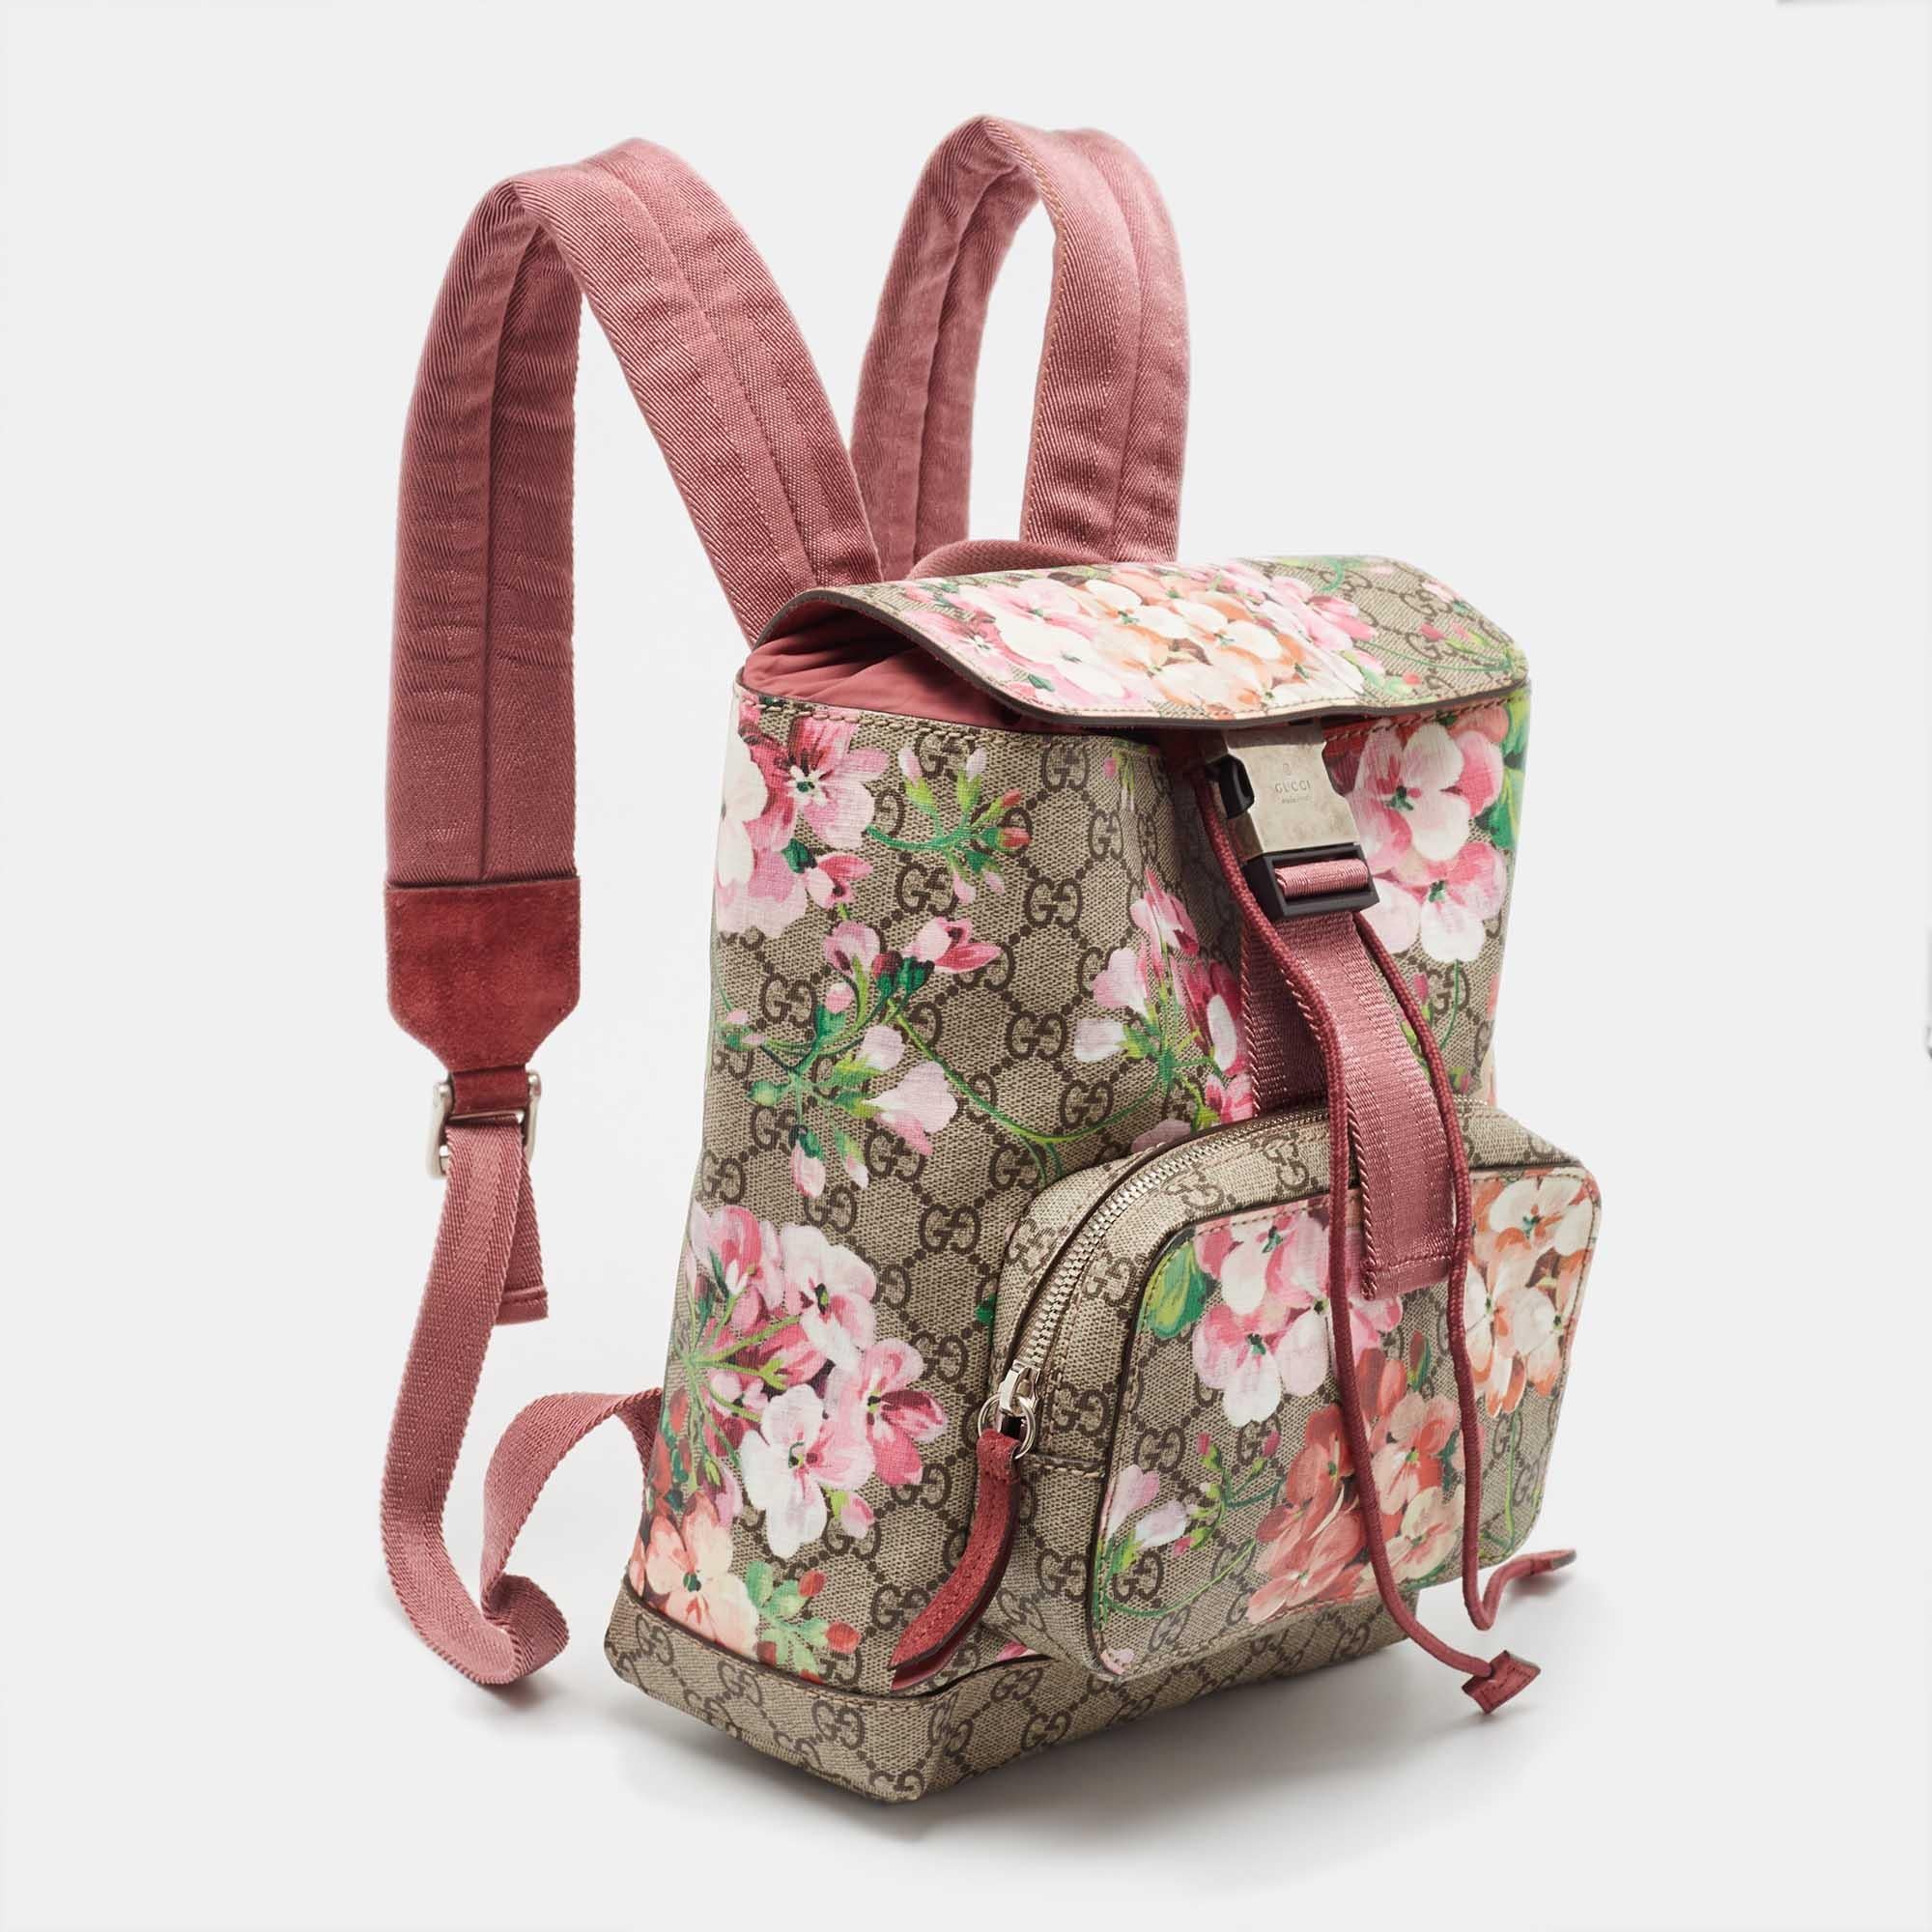 This stylish backpack from Gucci is made from signature GG Blooms Supreme canvas and is enhanced with leather trims. The bag features a zip pocket on the front and shoulder straps. It has a spacious interior that is lined with nylon. The simple